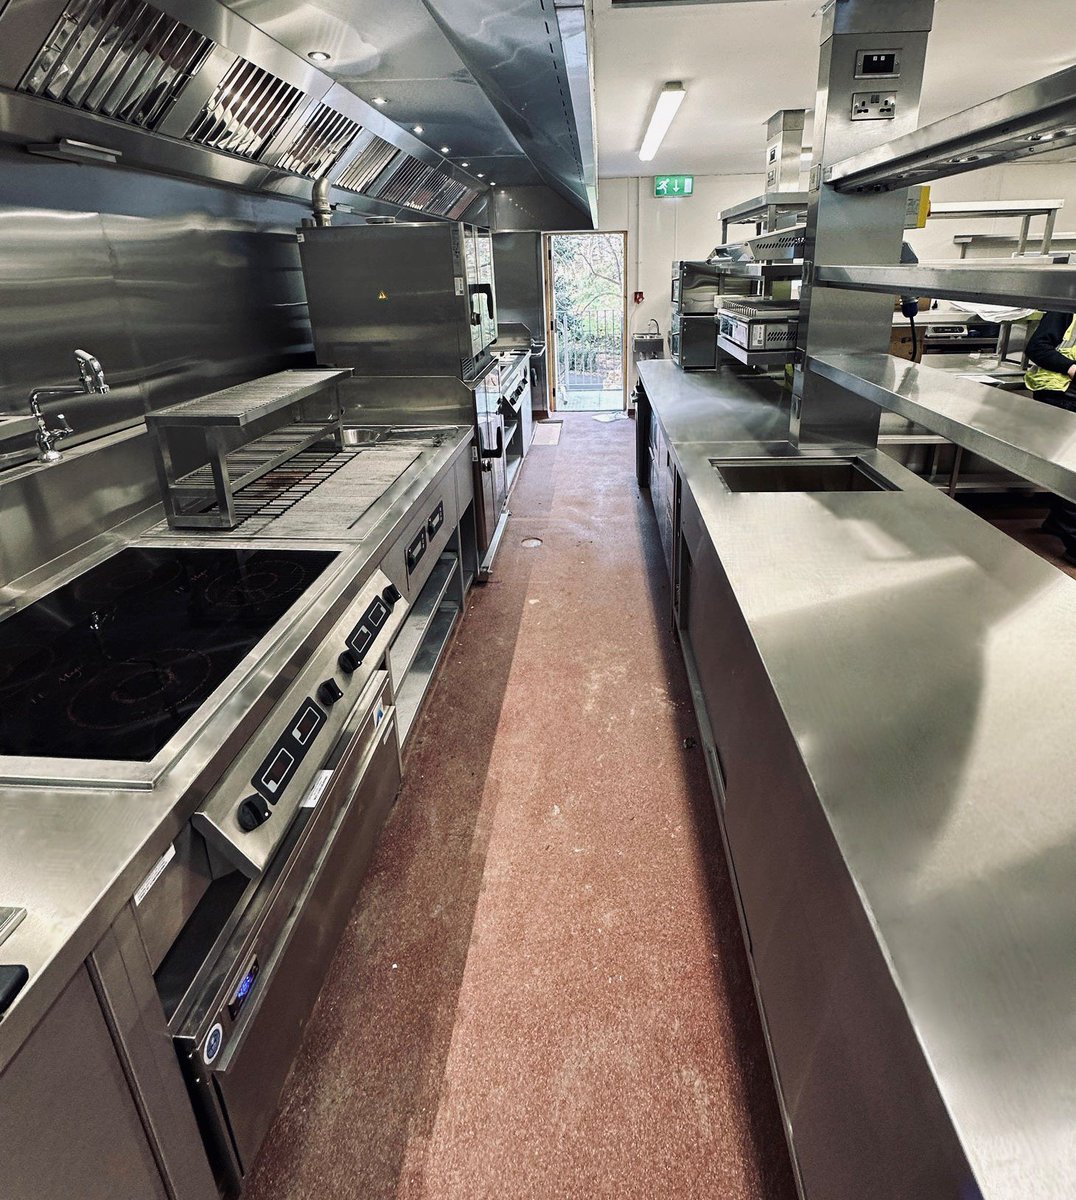 Starting the new year busier than ever, we're thrilled to spotlight one of our latest turnkey kitchen projects🍴 Featuring bespoke fabrication and cooklines, chiller/freezer rooms, ventilation, and more. Contact us today! #transformation #kitchendesign #team #contractors